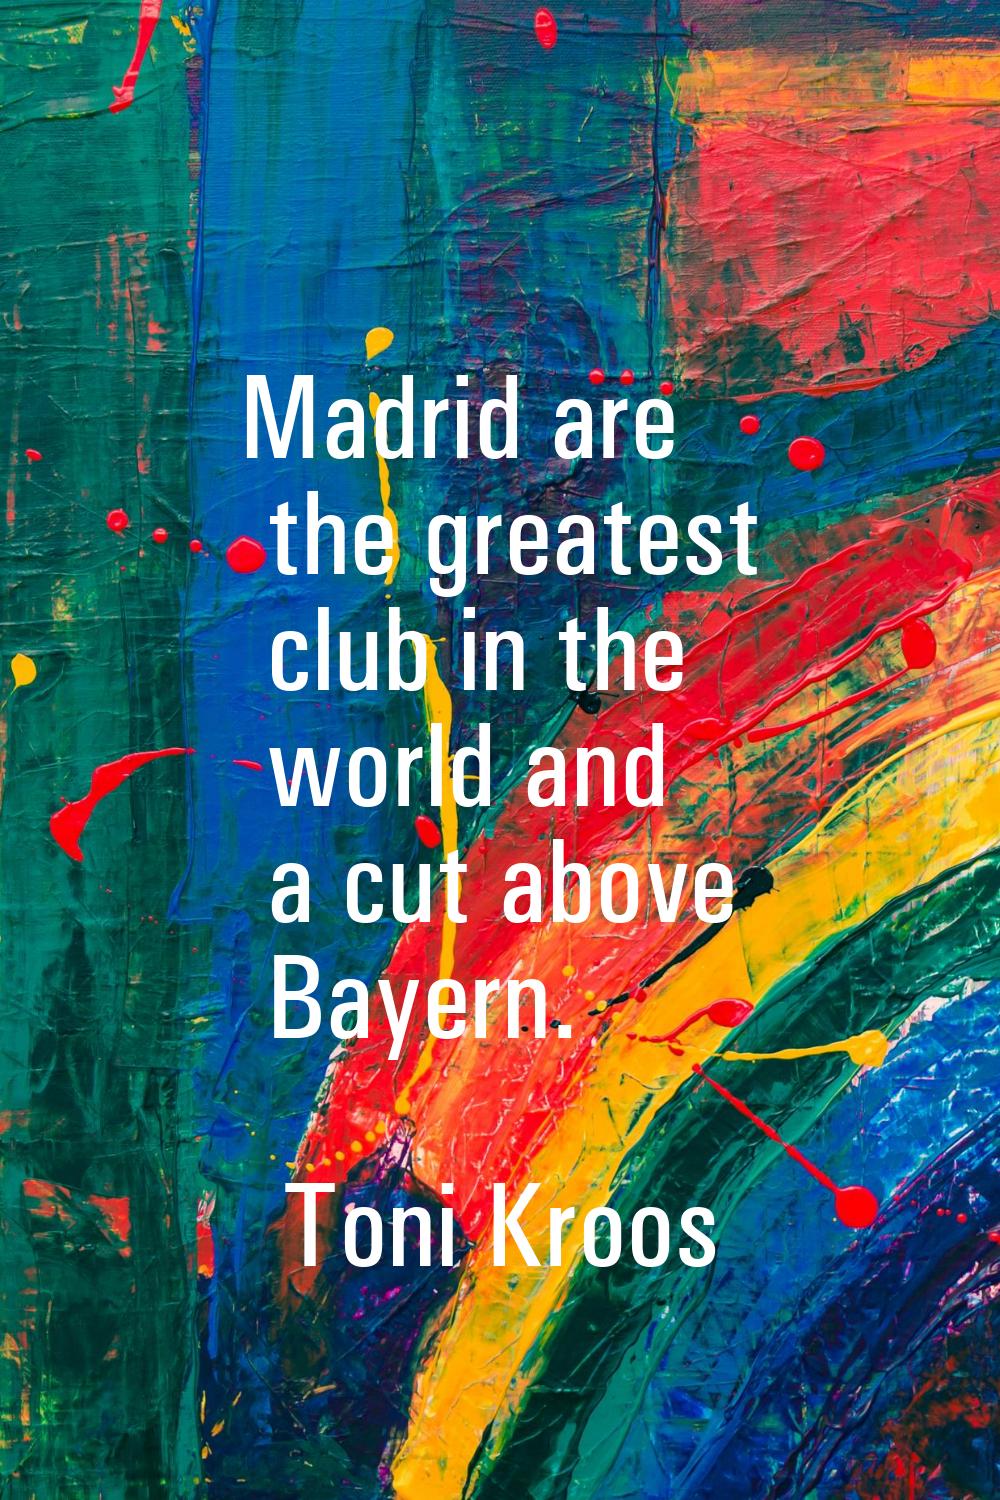 Madrid are the greatest club in the world and a cut above Bayern.